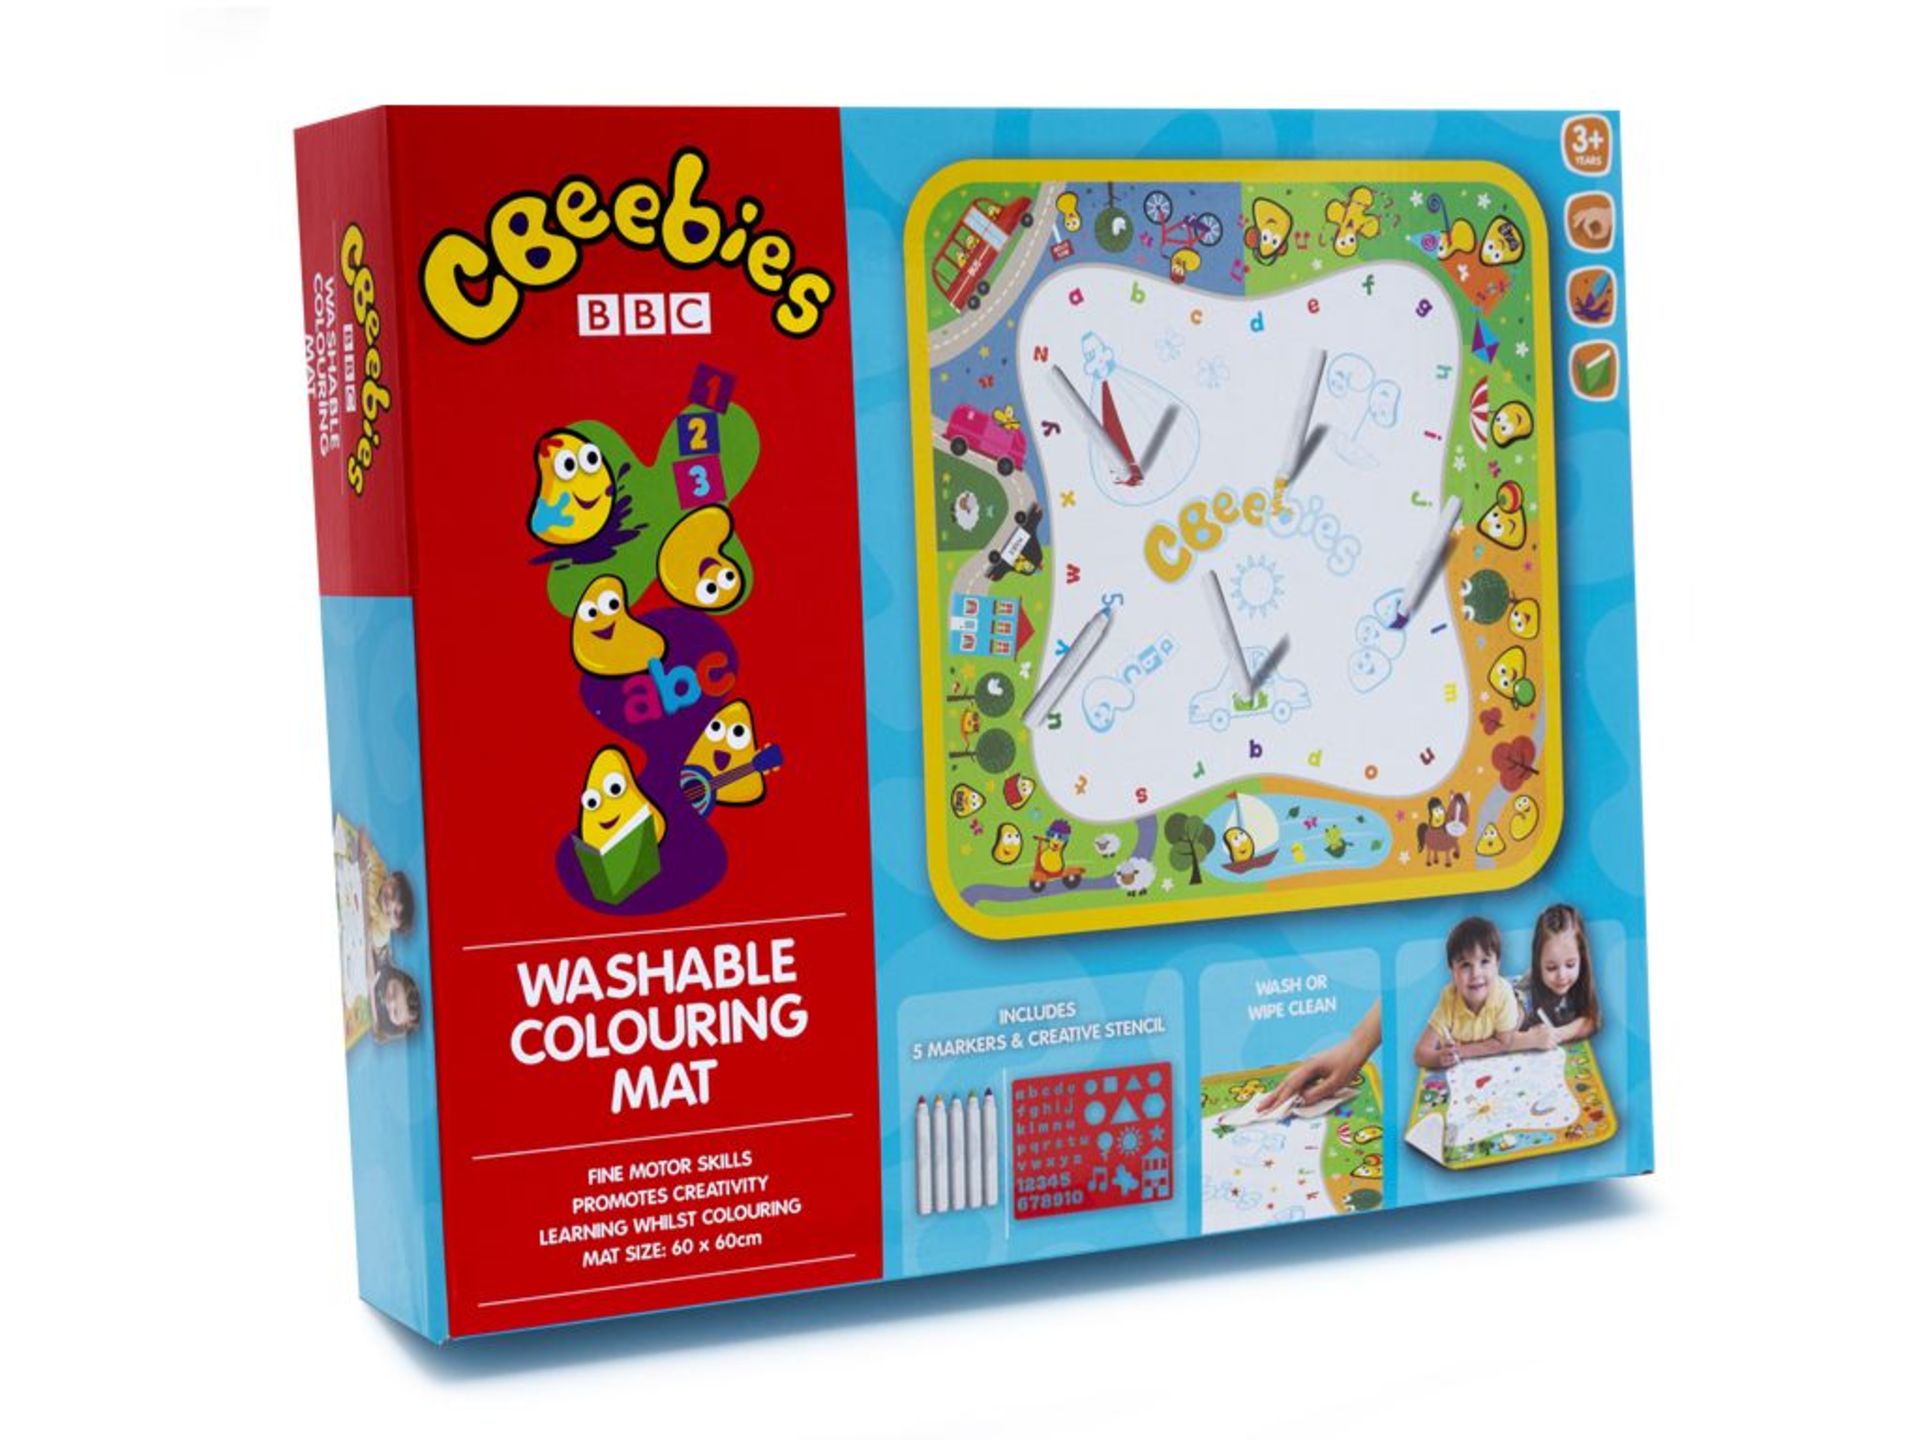 CBEEBIES WASHERBLE COLOURING MAT